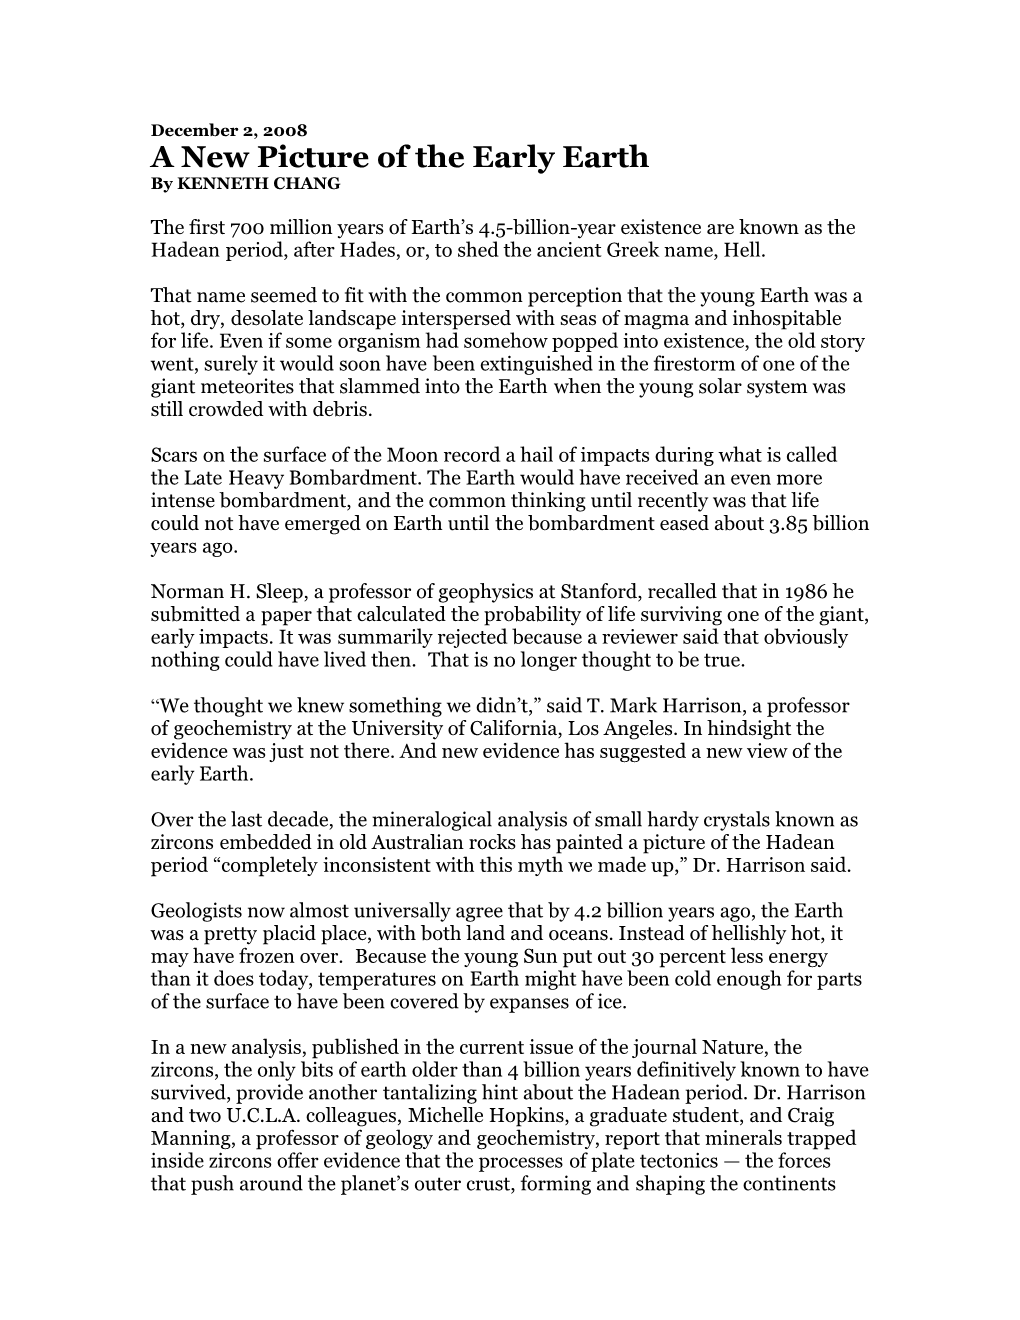 A New Picture of the Early Earth